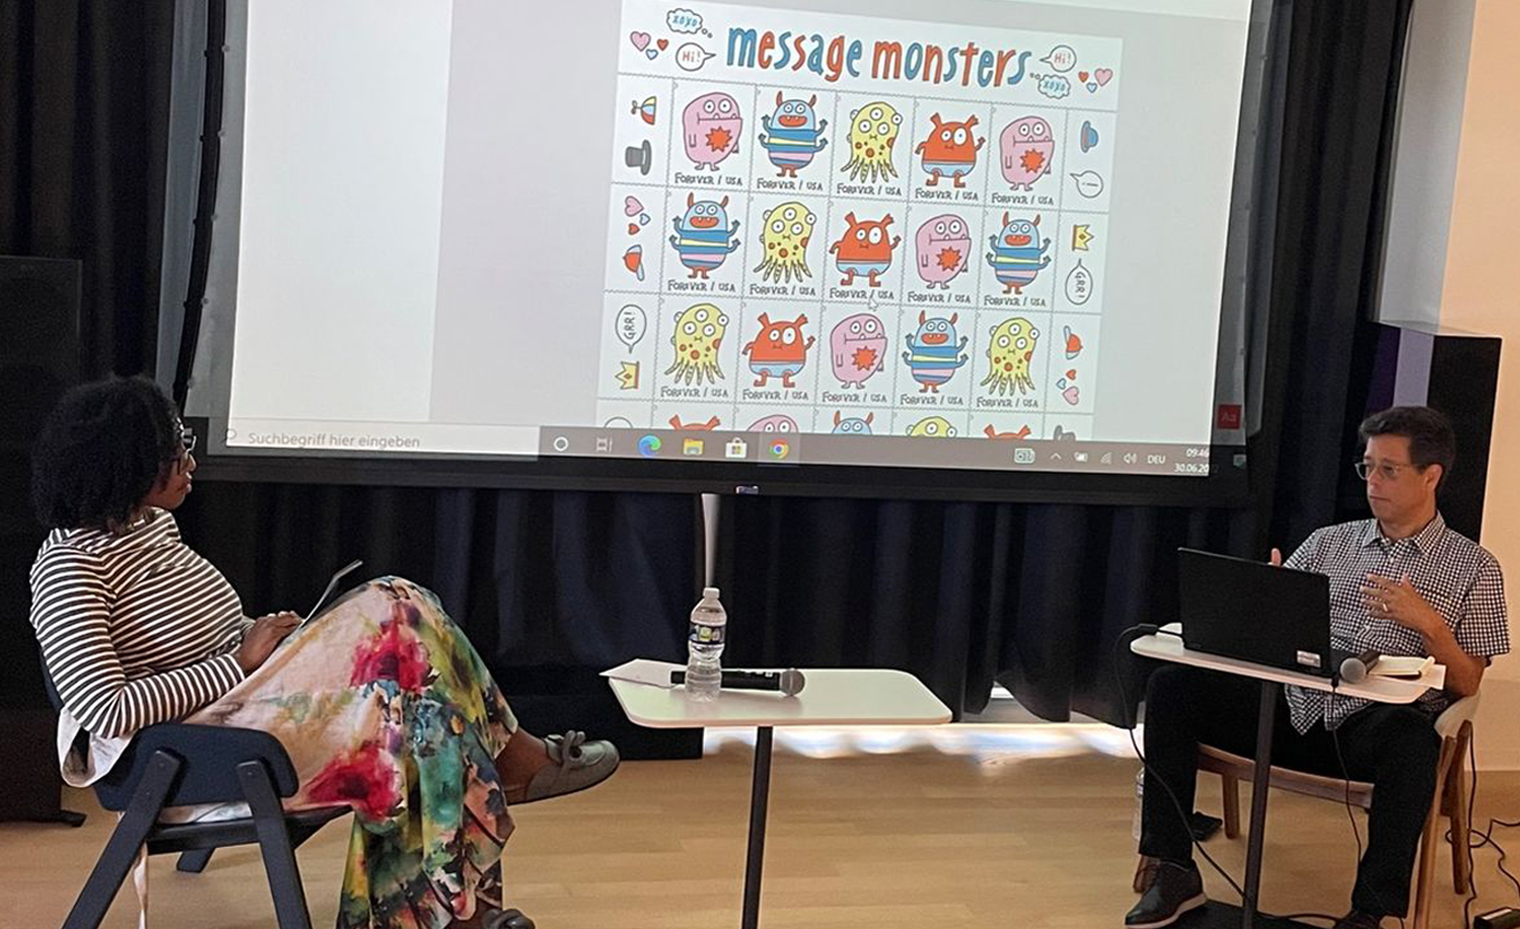 Dian Holton and Antonio Alcala seated in front of a screen that has the Message Monsters stamp on screen. It features whimsical creatures and additional stickers that can be added by the sender on the stamp